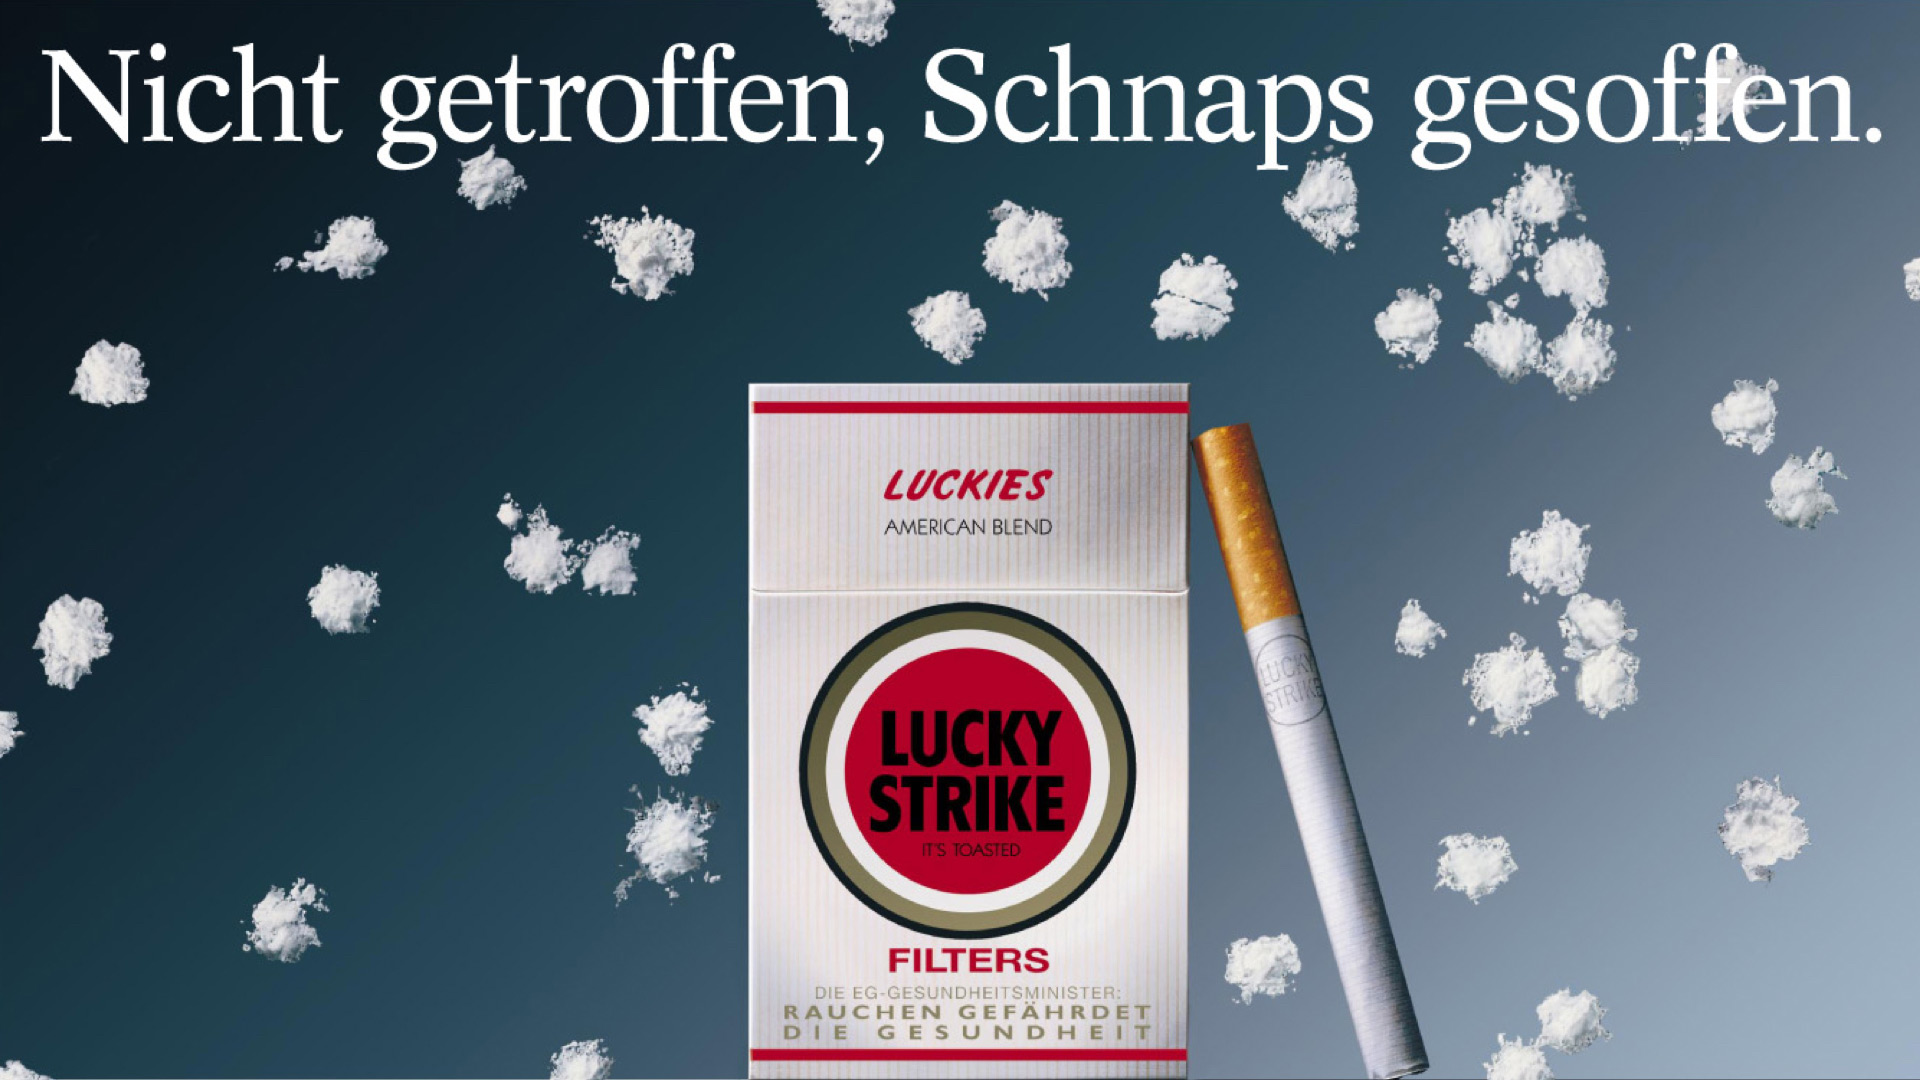 From billboard to event: Integrated campaign for LUCKY STRIKE. For the tobacco industry, alongside campaigns for HB, Prince and Pall Mall, Michael Barche of ORANGE COUNCIL was responsible for the award-winning Lucky Strike campaign. He also coordinated international cooperation for the brand.